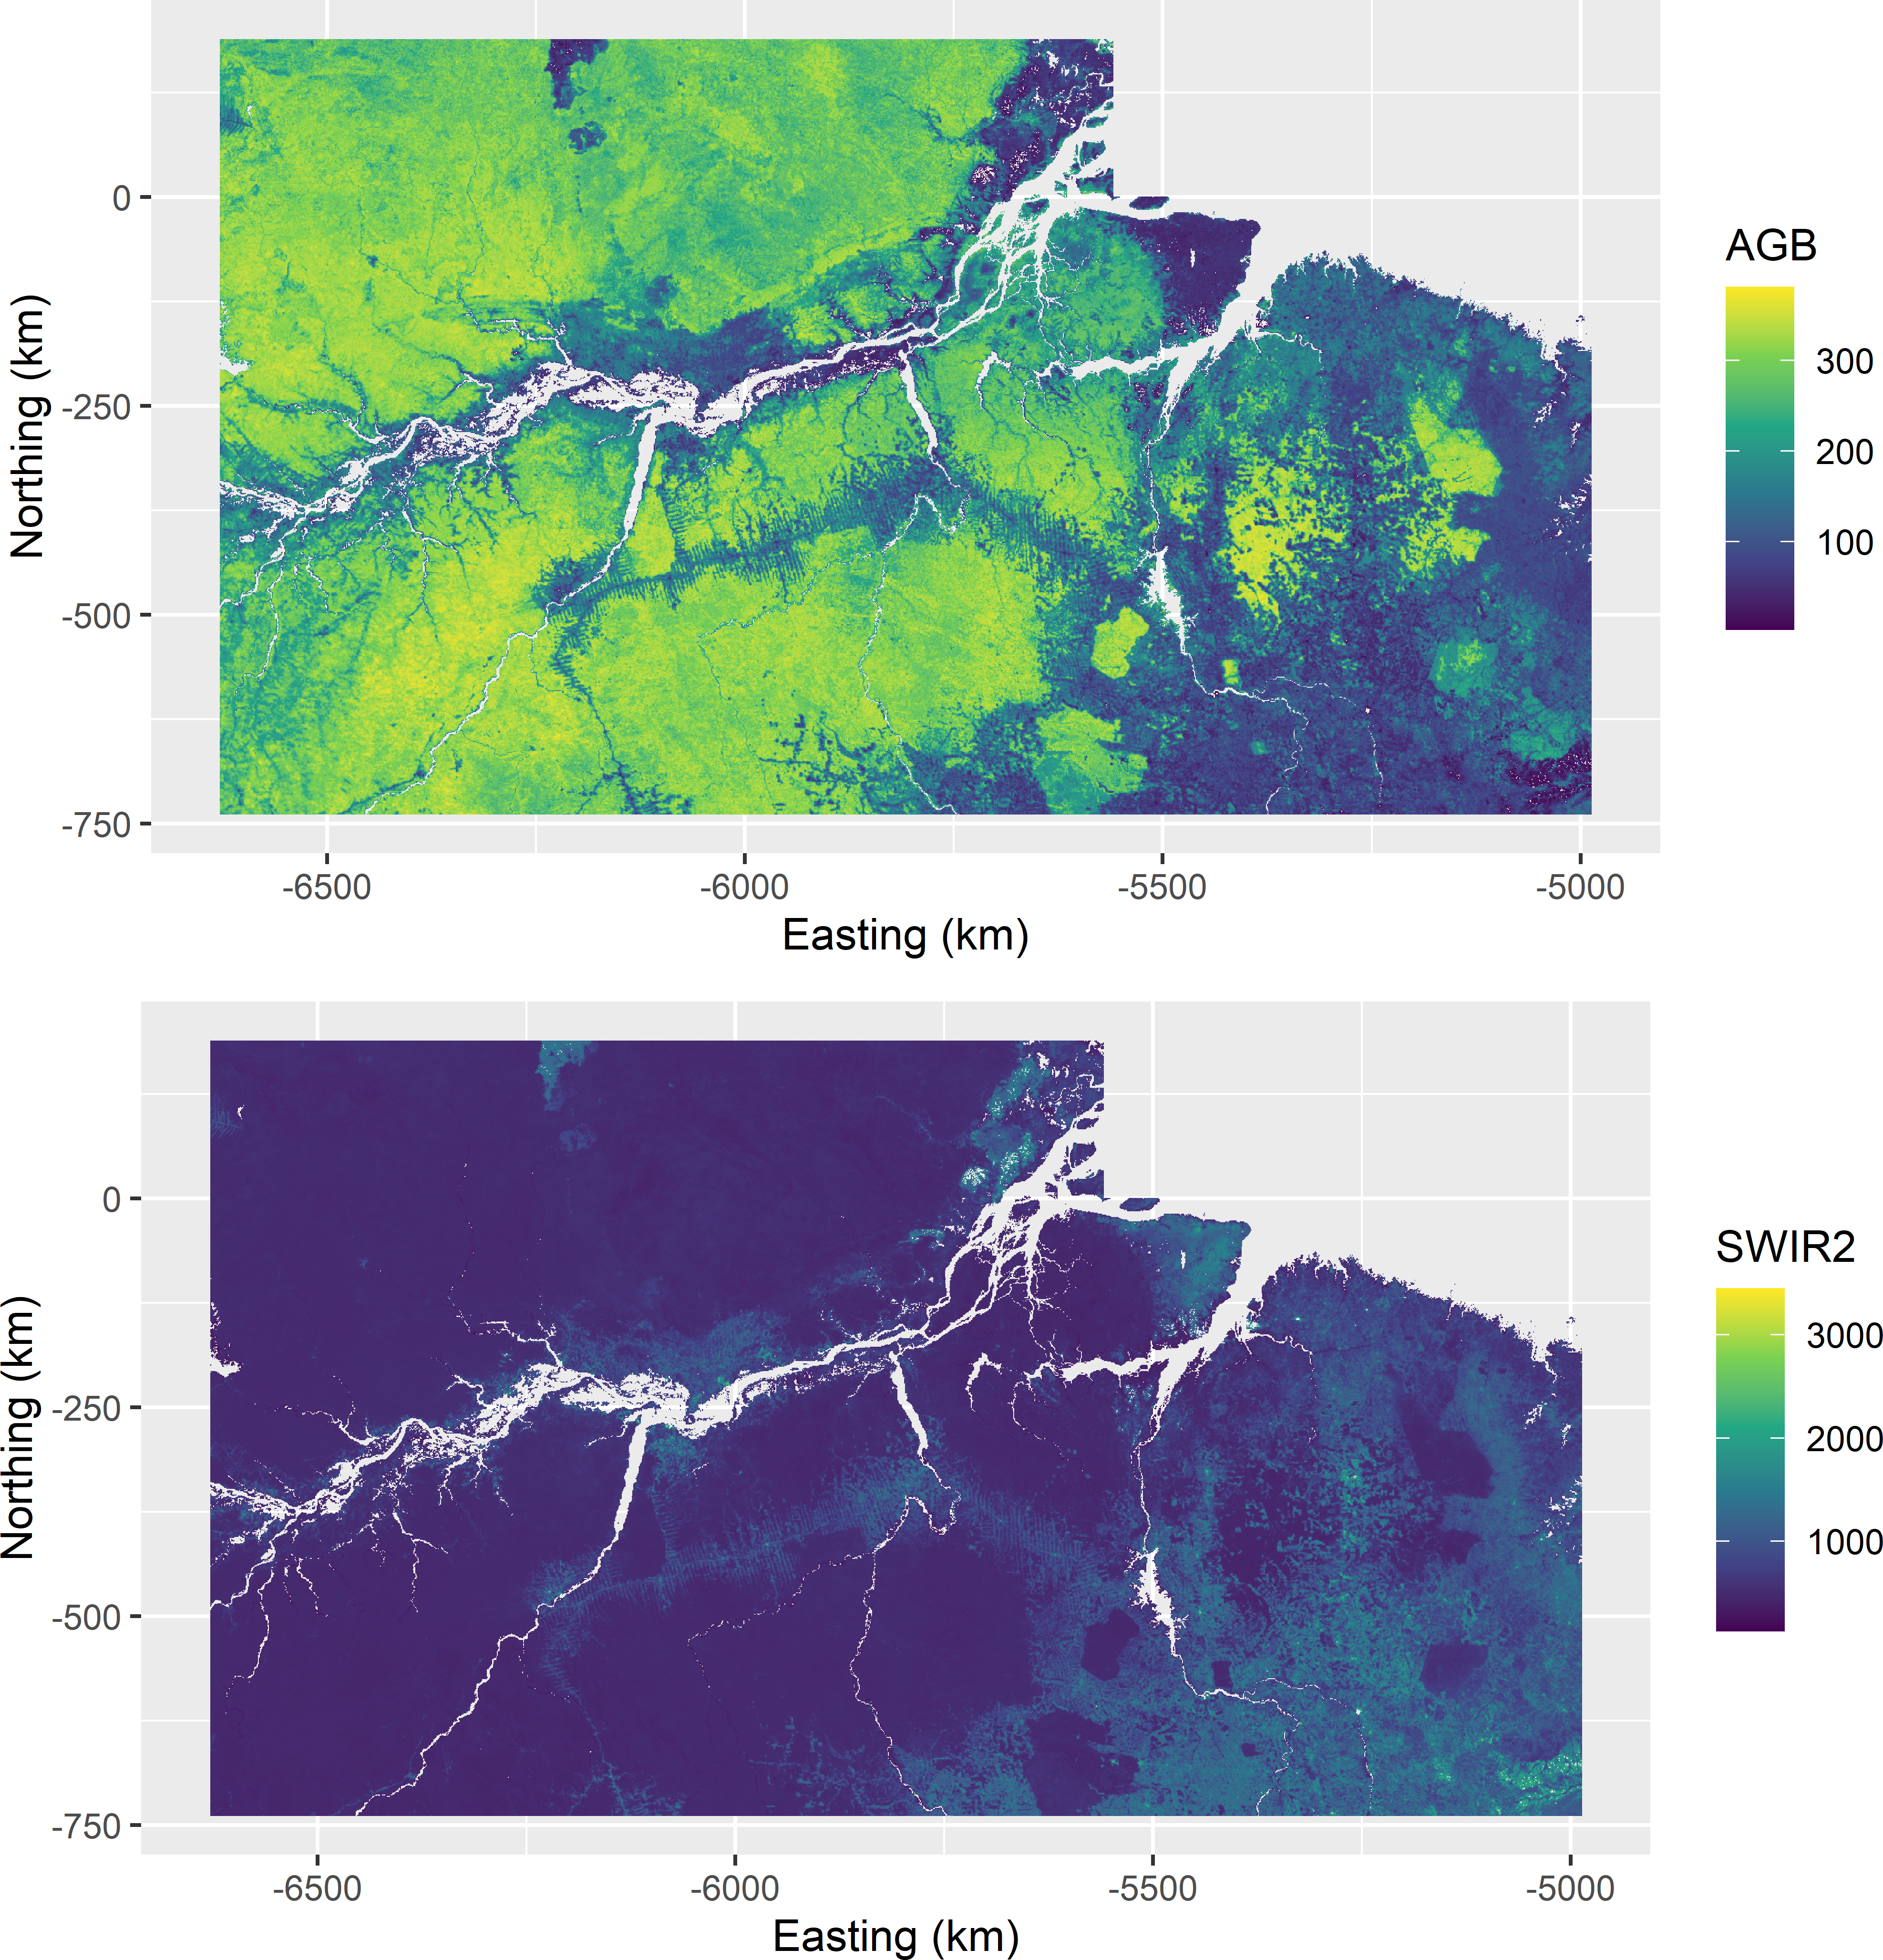 Aboveground biomass (AGB) in 109 kg ha-1 and short-wave infrared radiation (SWIR2) of Eastern Amazonia.